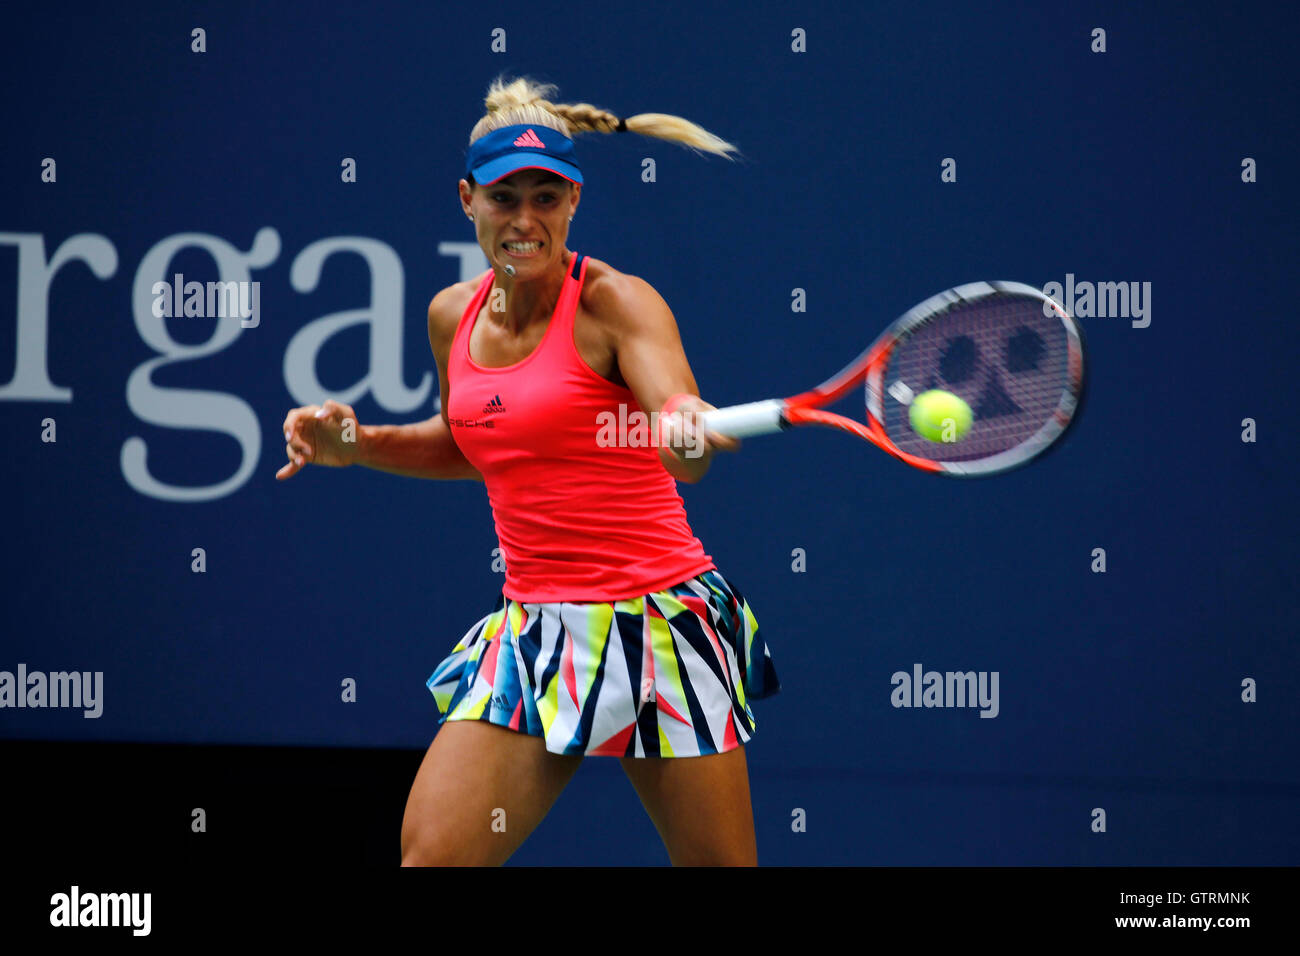 New York, USA. 10th September, 2016. Number 2 seed, Angelique Kerber of Germany in action against Karolina Pliskova of the Czech Republic during the finals of the United States Open Tennis Championships at Flushing Meadows, New York on Saturday, September 10th.  Kerber won the match and her first U.S. Open title in three sets Credit:  Adam Stoltman/Alamy Live News Stock Photo